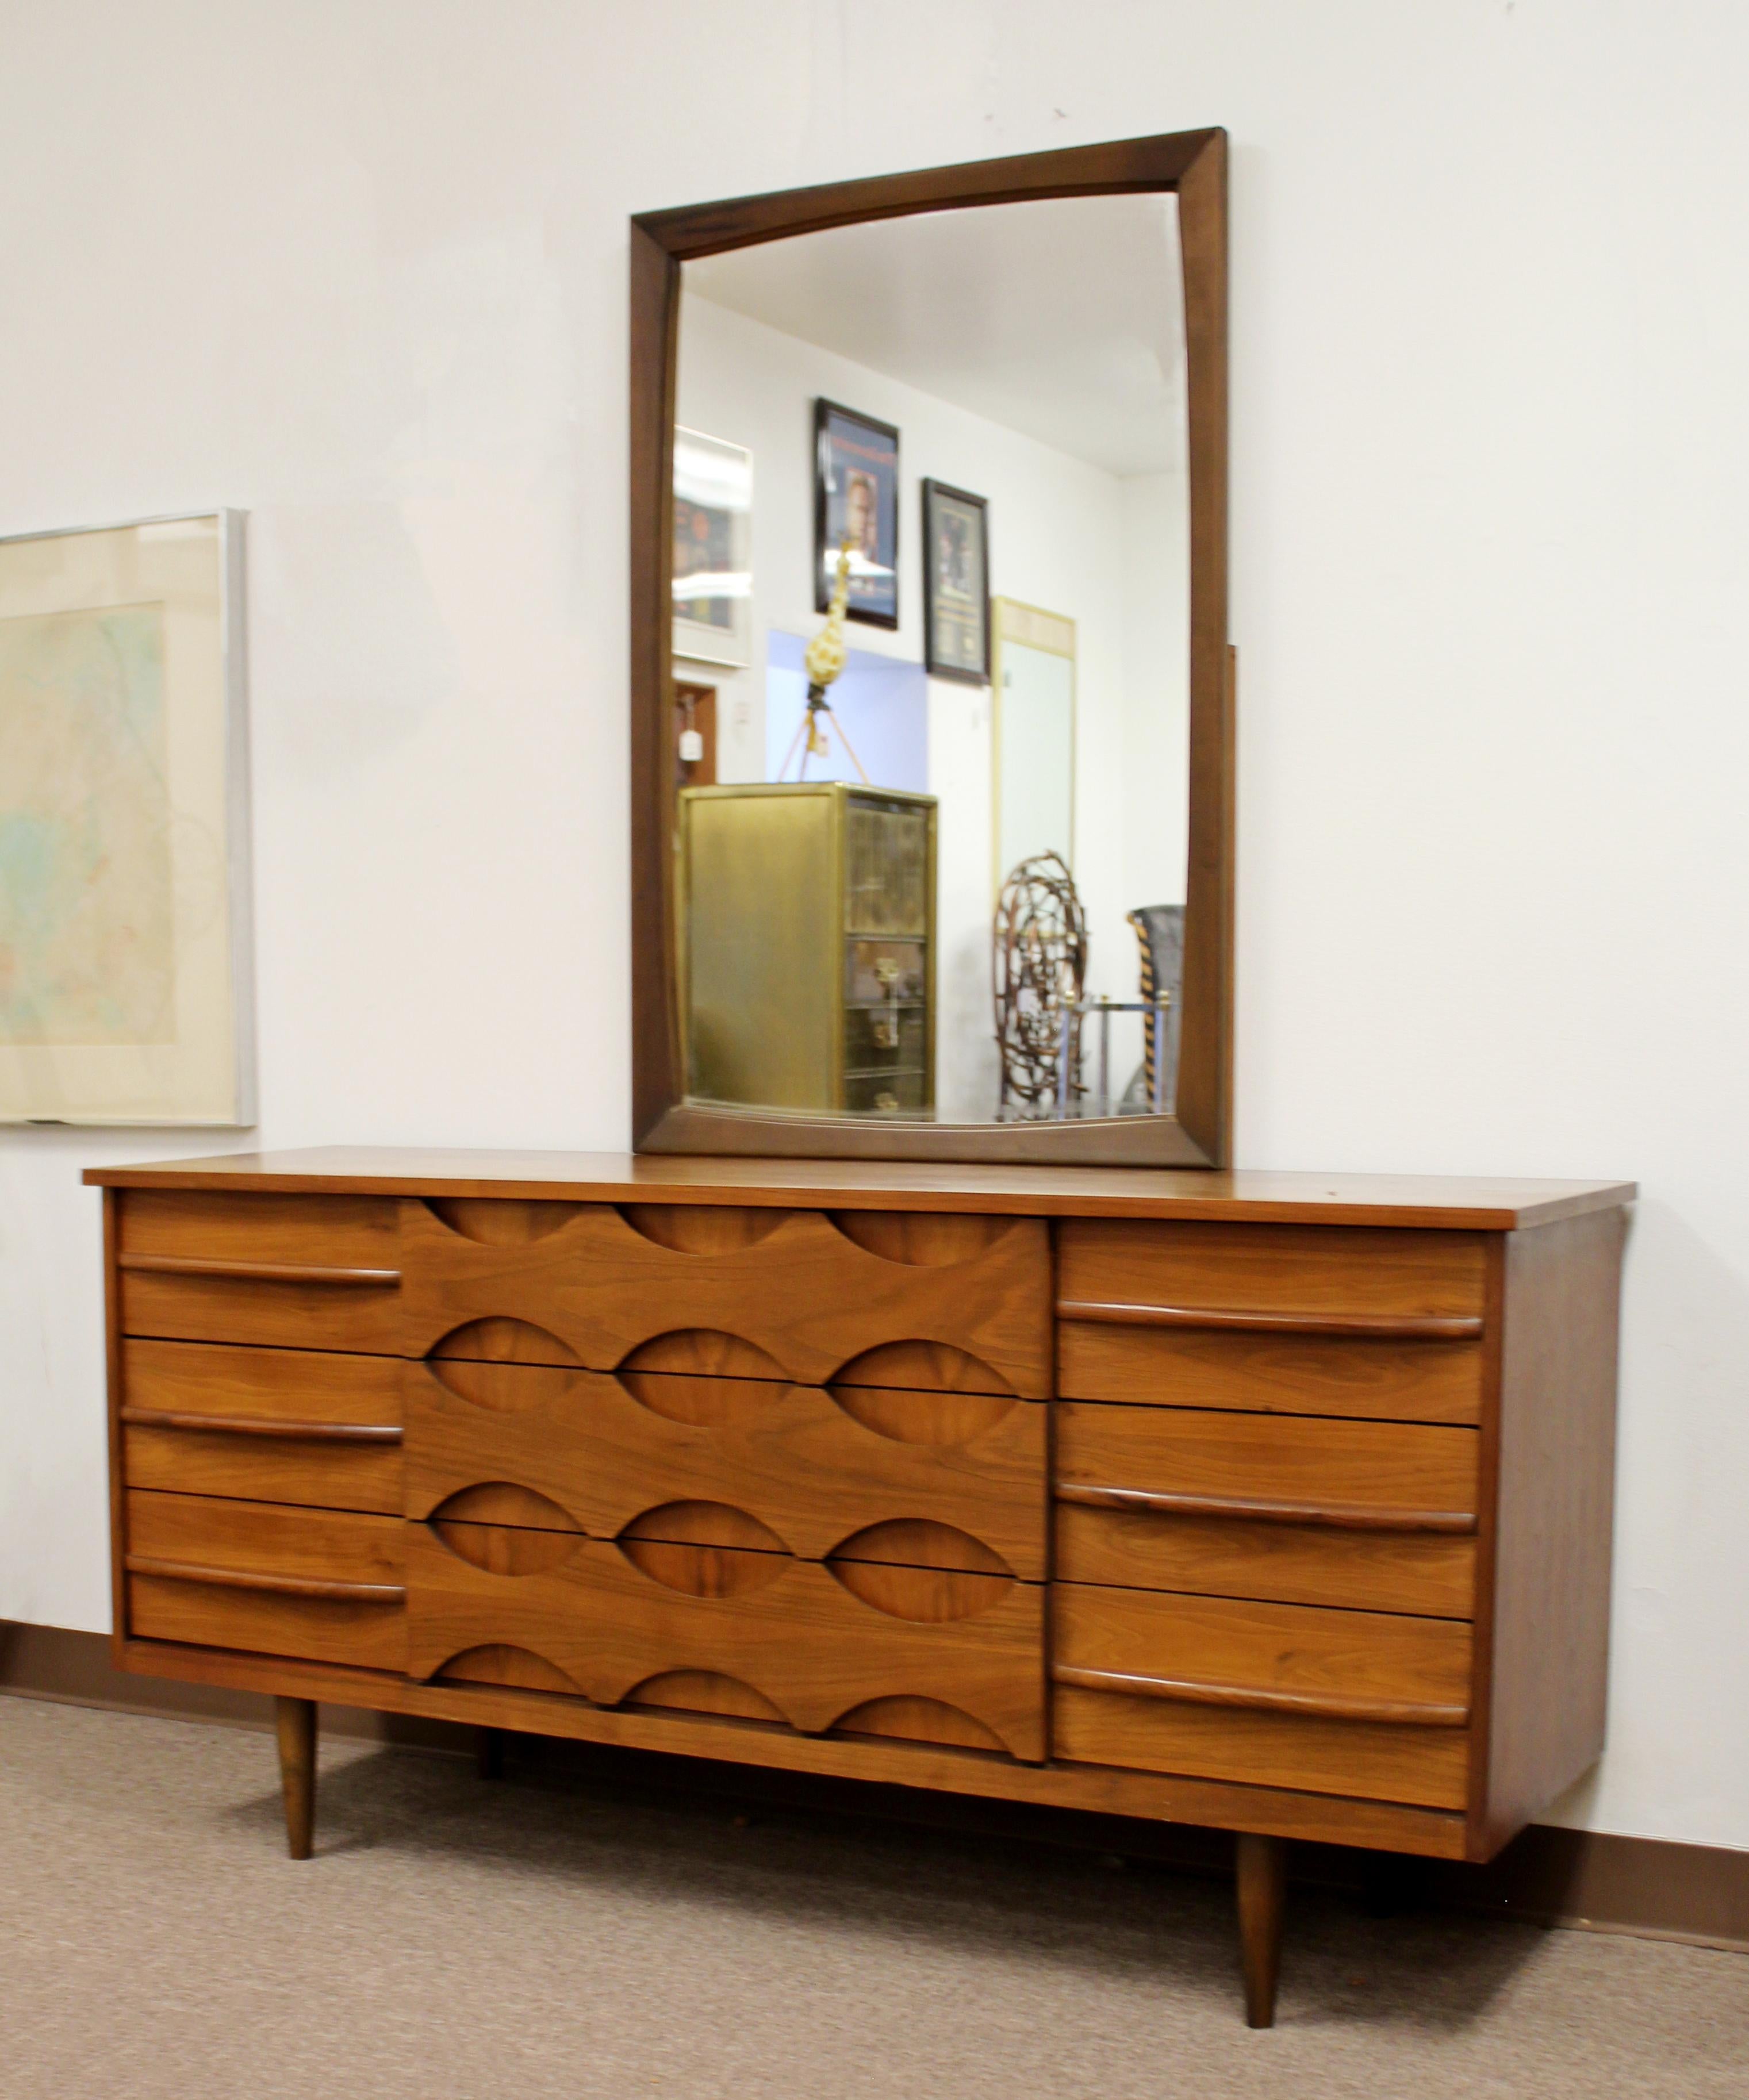 For your consideration is a stupendously carved, pair of walnut dressers, one with an attached mirror, made in Denmark, in the style of Arne Vodder, circa the 1960s. In excellent vintage condition. The dimensions of the highboy are 38